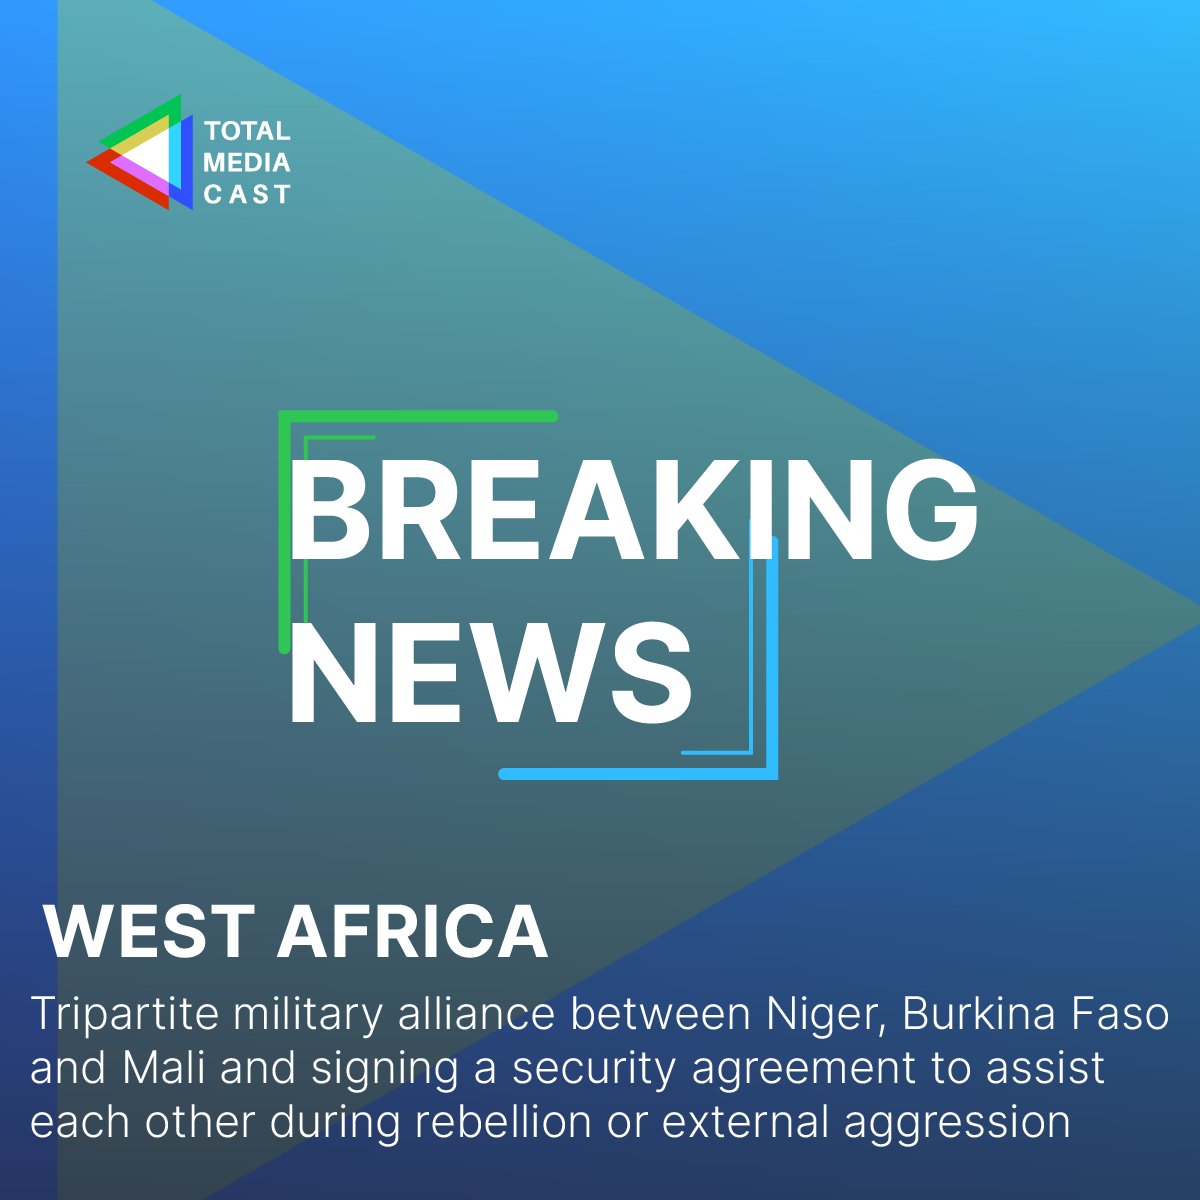 Announced a tripartite military alliance between Niger, Burkina Faso, and Mali and signed a security agreement in which they pledged to assist each other against rebellion or external aggression
#WestAfrica #Niger #BurkinaFaso #Mali #MilitaryAlliance #Agreement
#TotalMediaCast